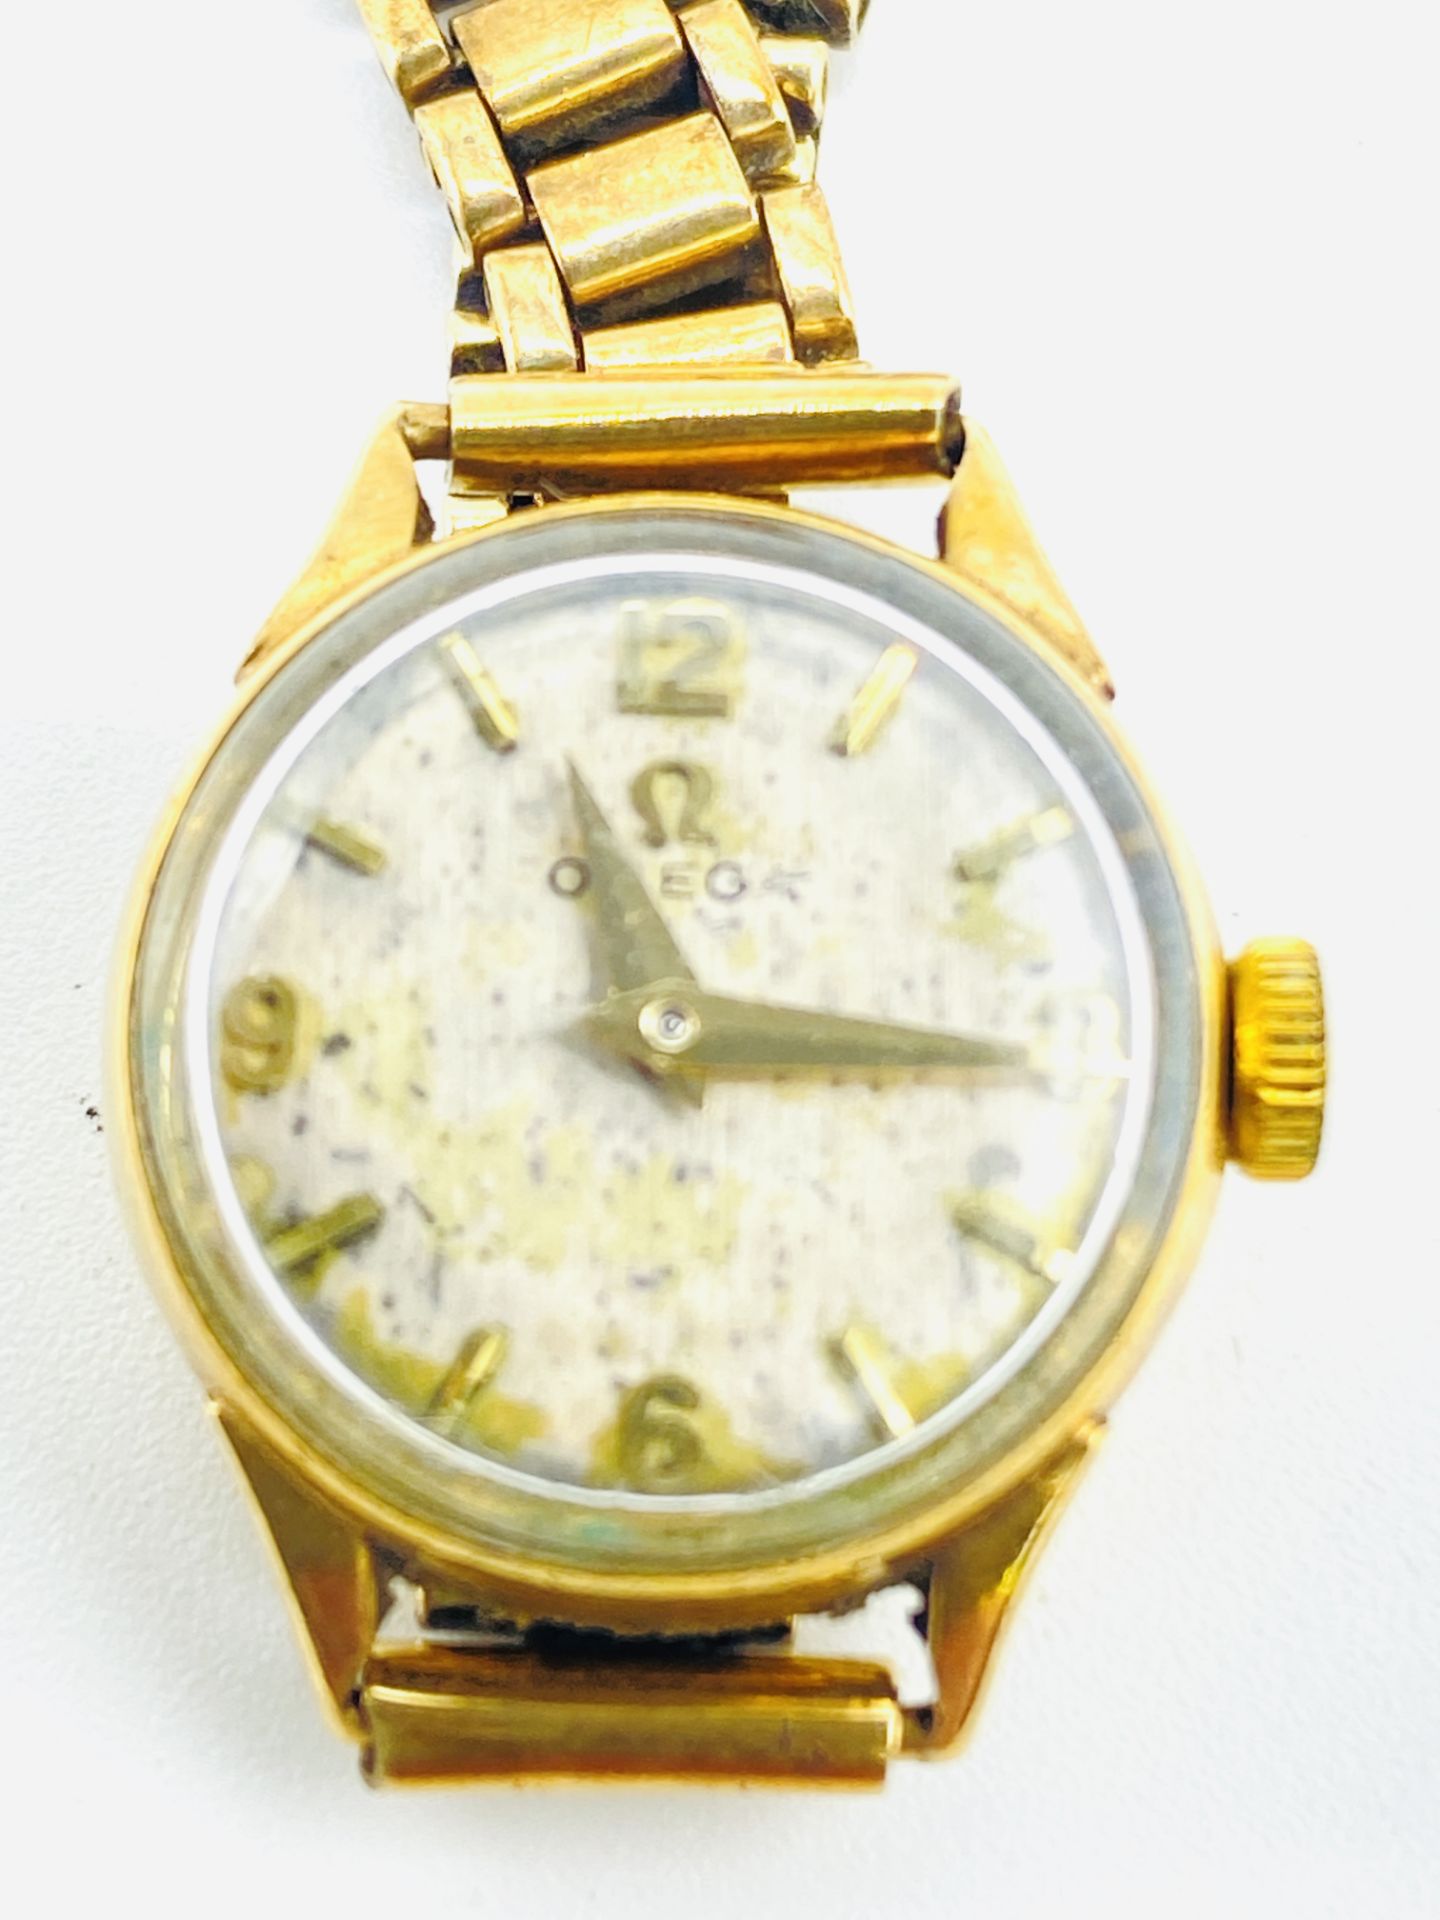 Omega 17 jewels wrist watch in 9ct gold case, with 9ct gold strap - Image 2 of 3